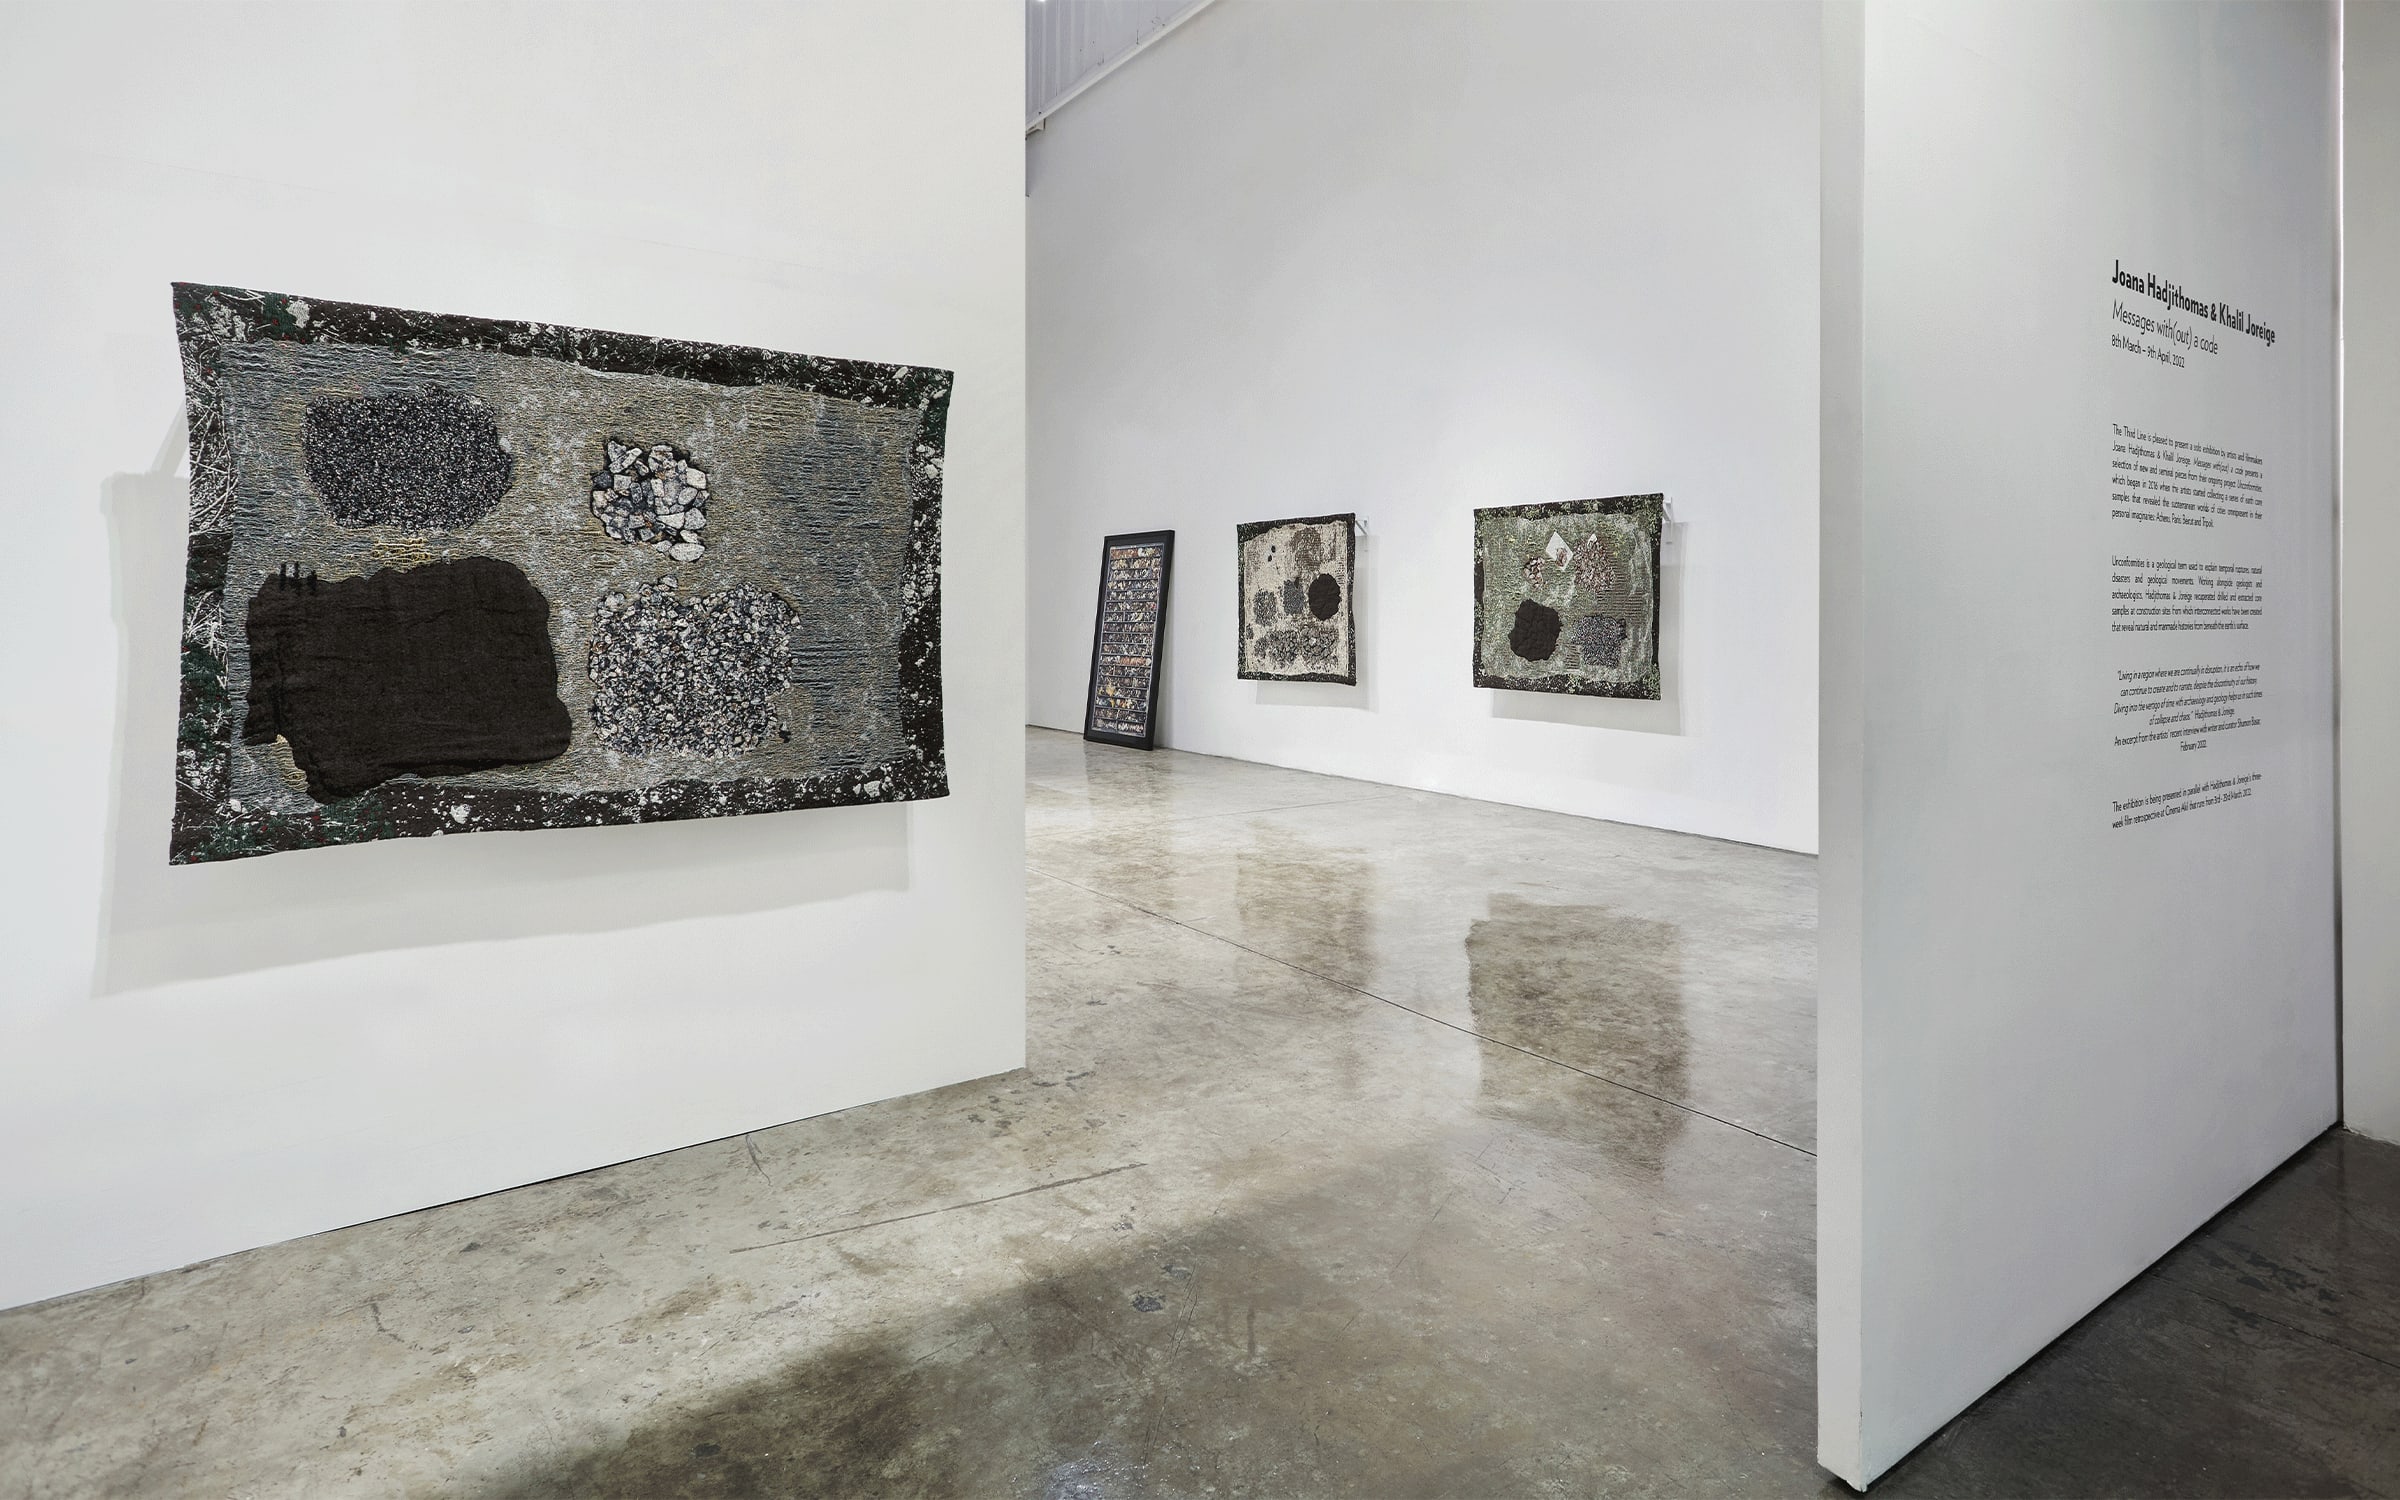 Installation view of Joana Hadjithomas & Khalil Joreige’s exhibition ‘Messages with(out) a code’, The Third Line, Dubai, 2022. Courtesy of the artists and Third Line.